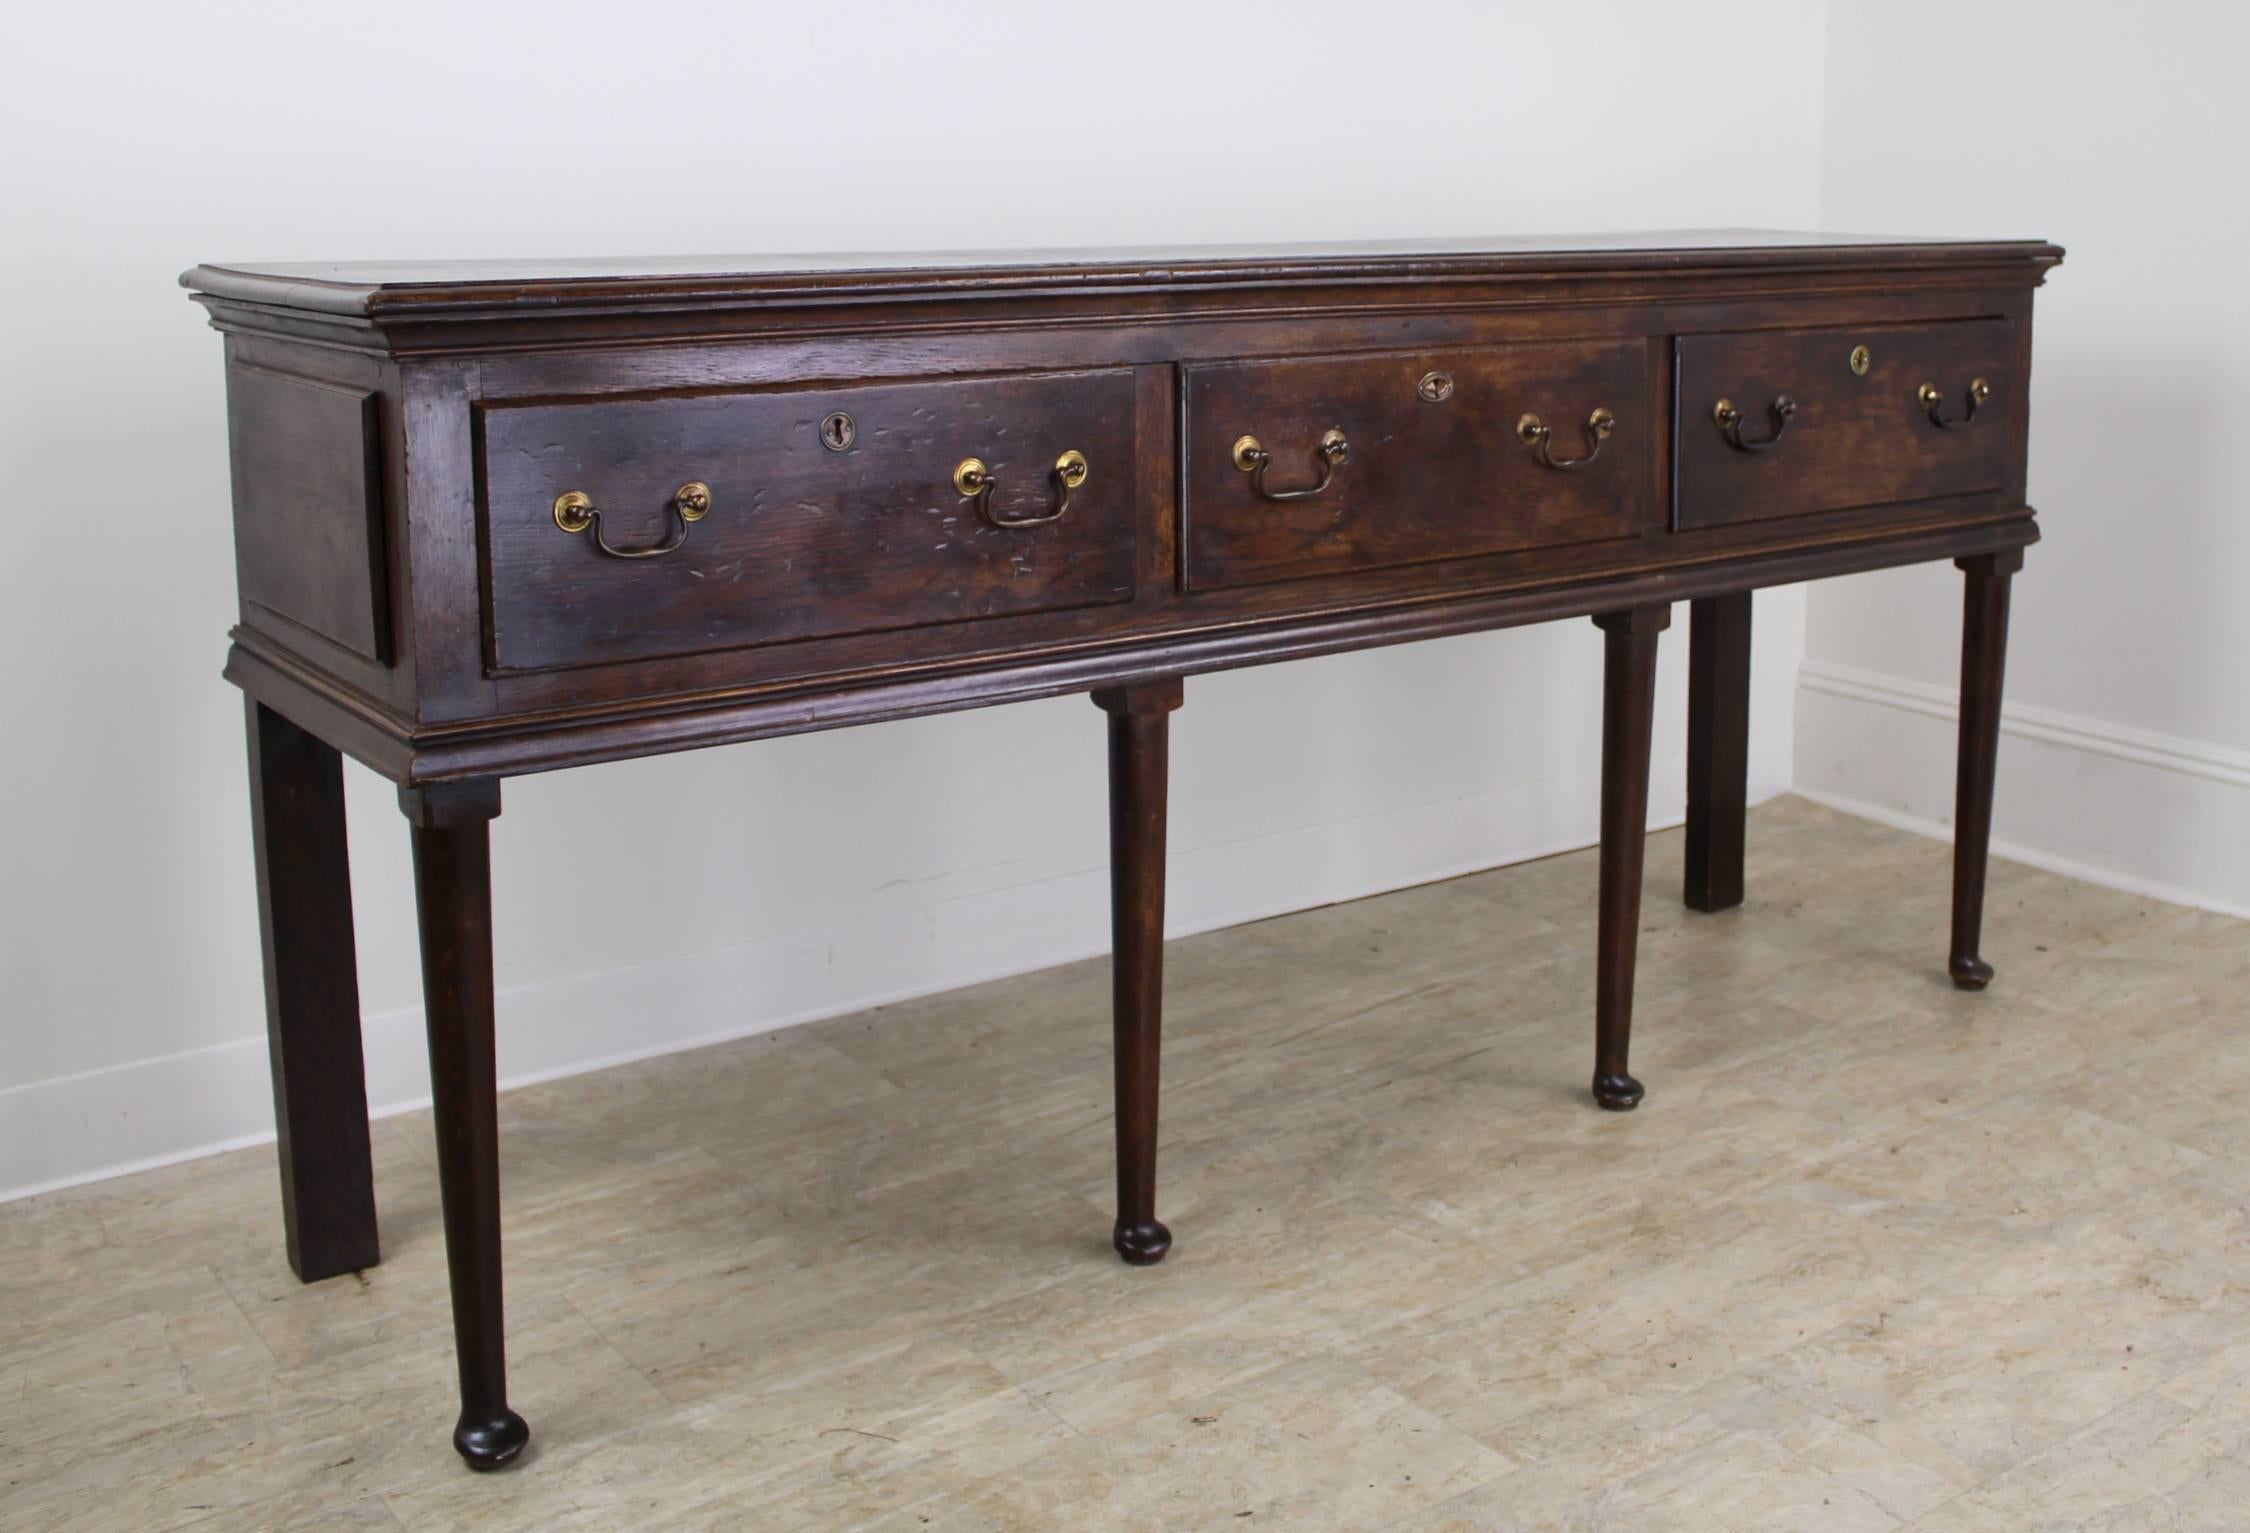 A rich dark oak server offering all the Classic very early components of the period. Great size for a variety of places in the home, in keeping with the farm table look. This excellent console would be lovely in an entry hall, setting the tone for a